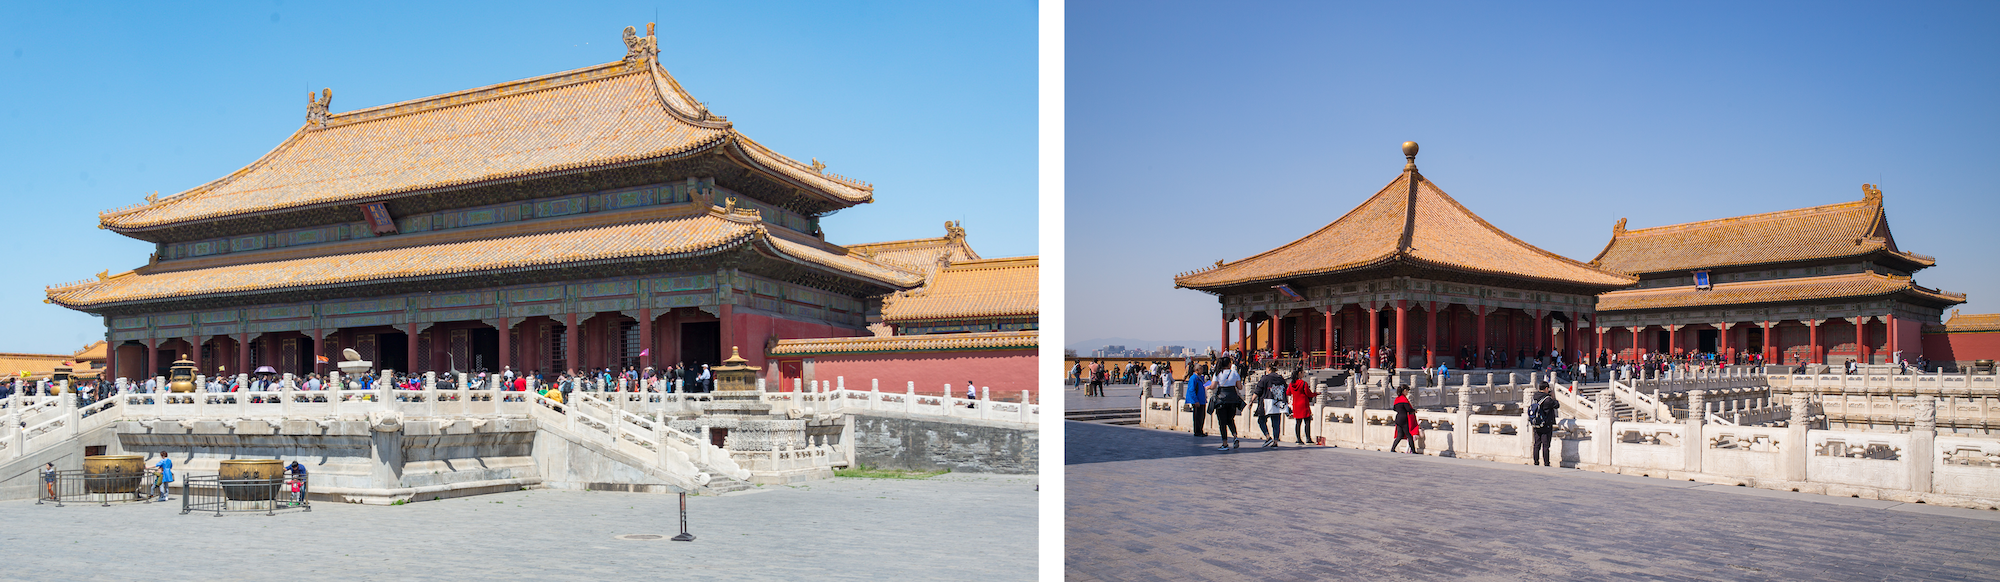 Why 30% of the Forbidden City not open?